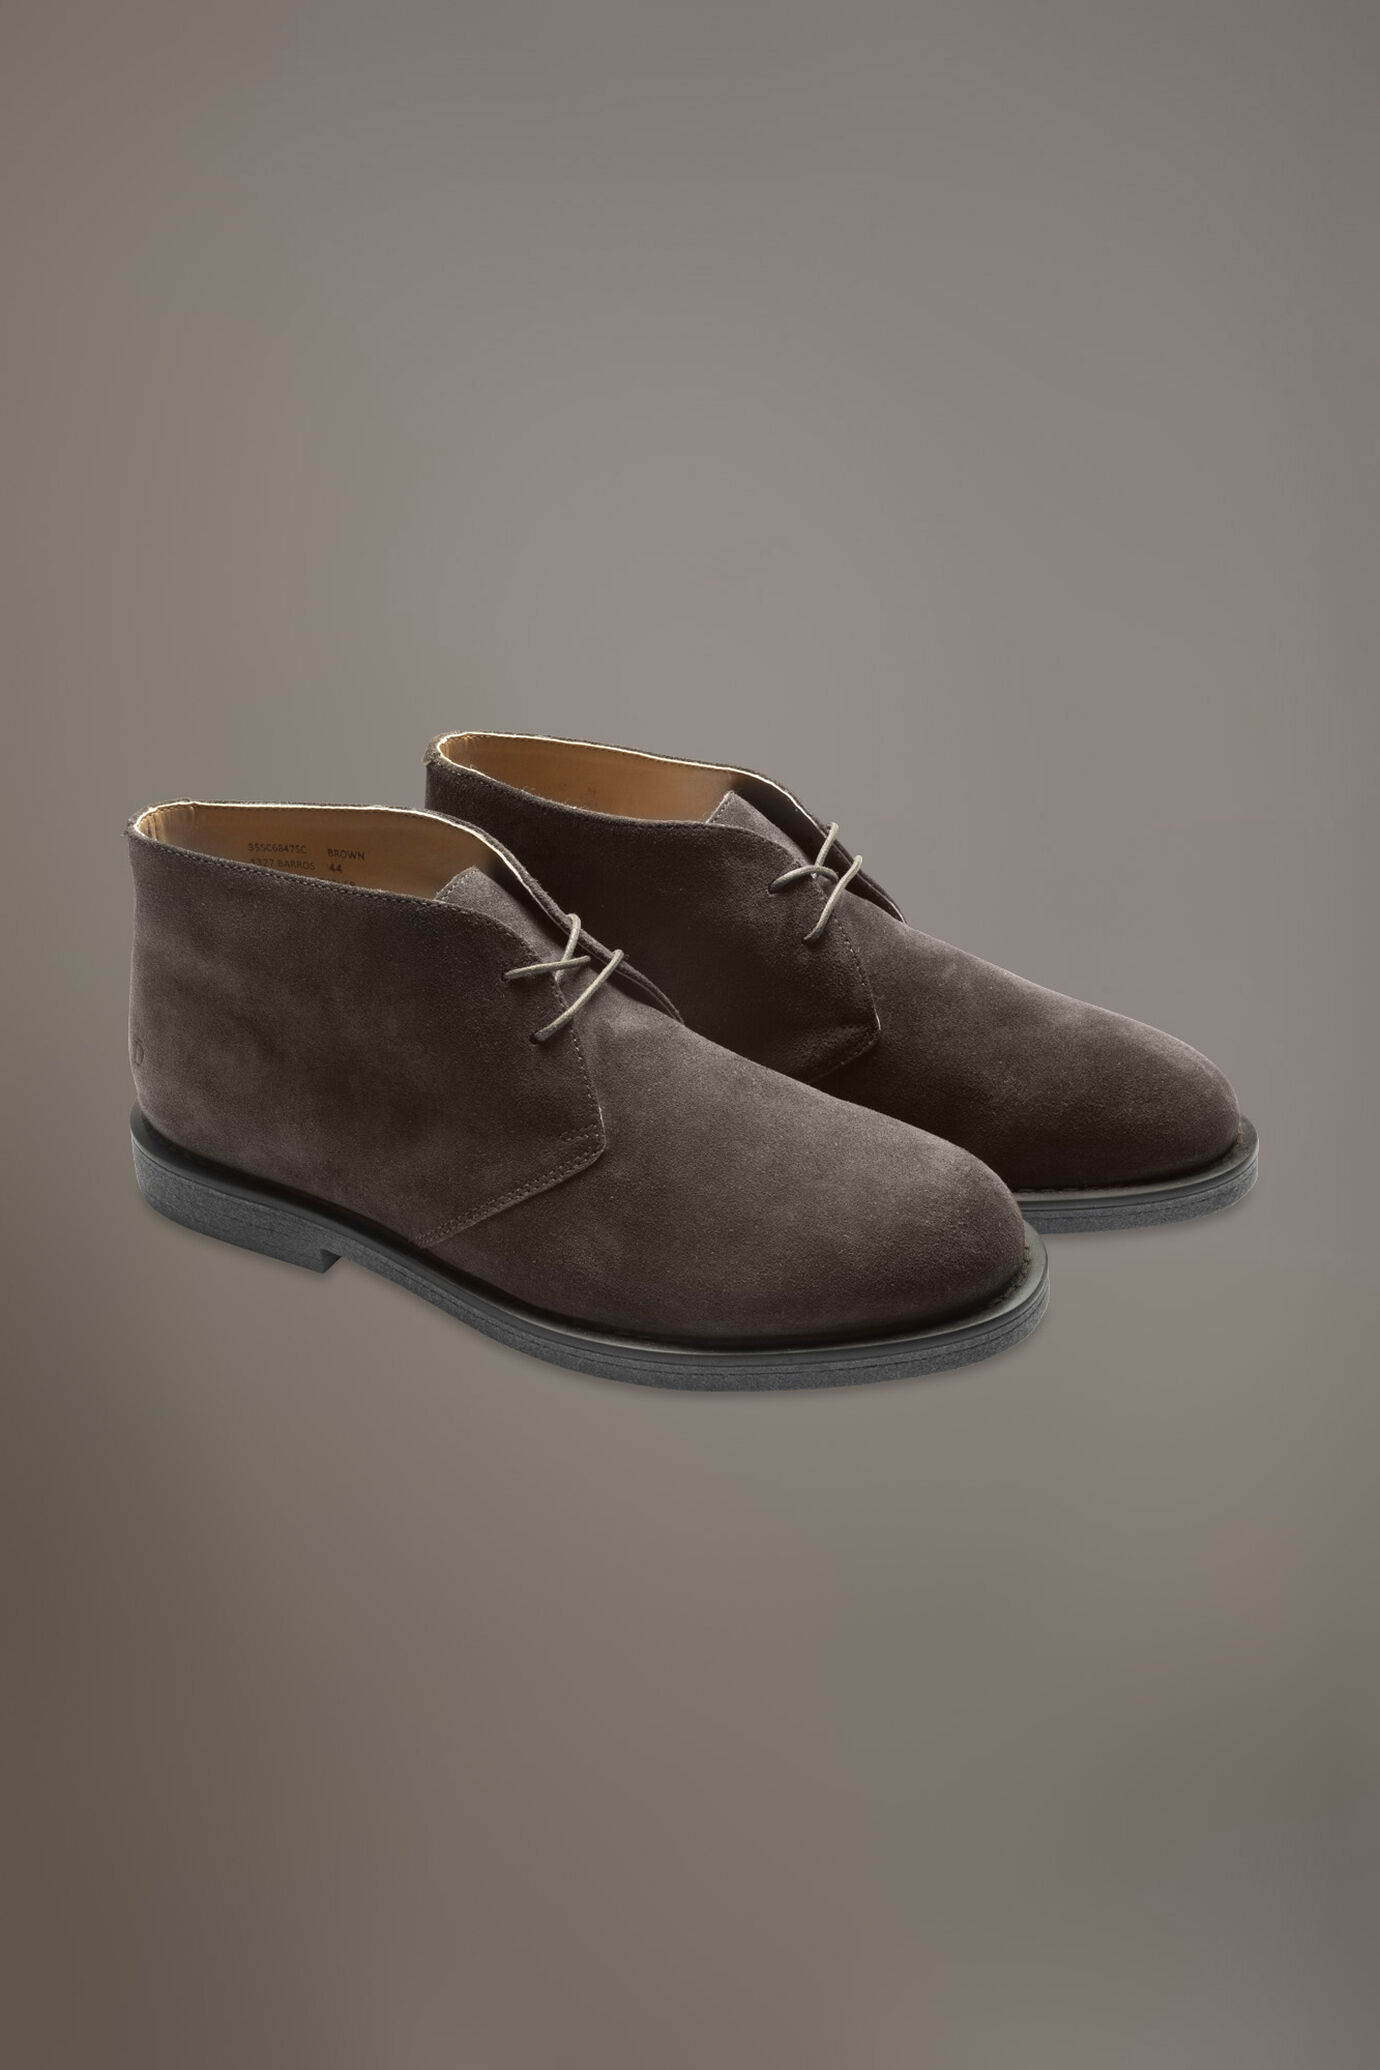 100% suede leather desert boots with rubber sole